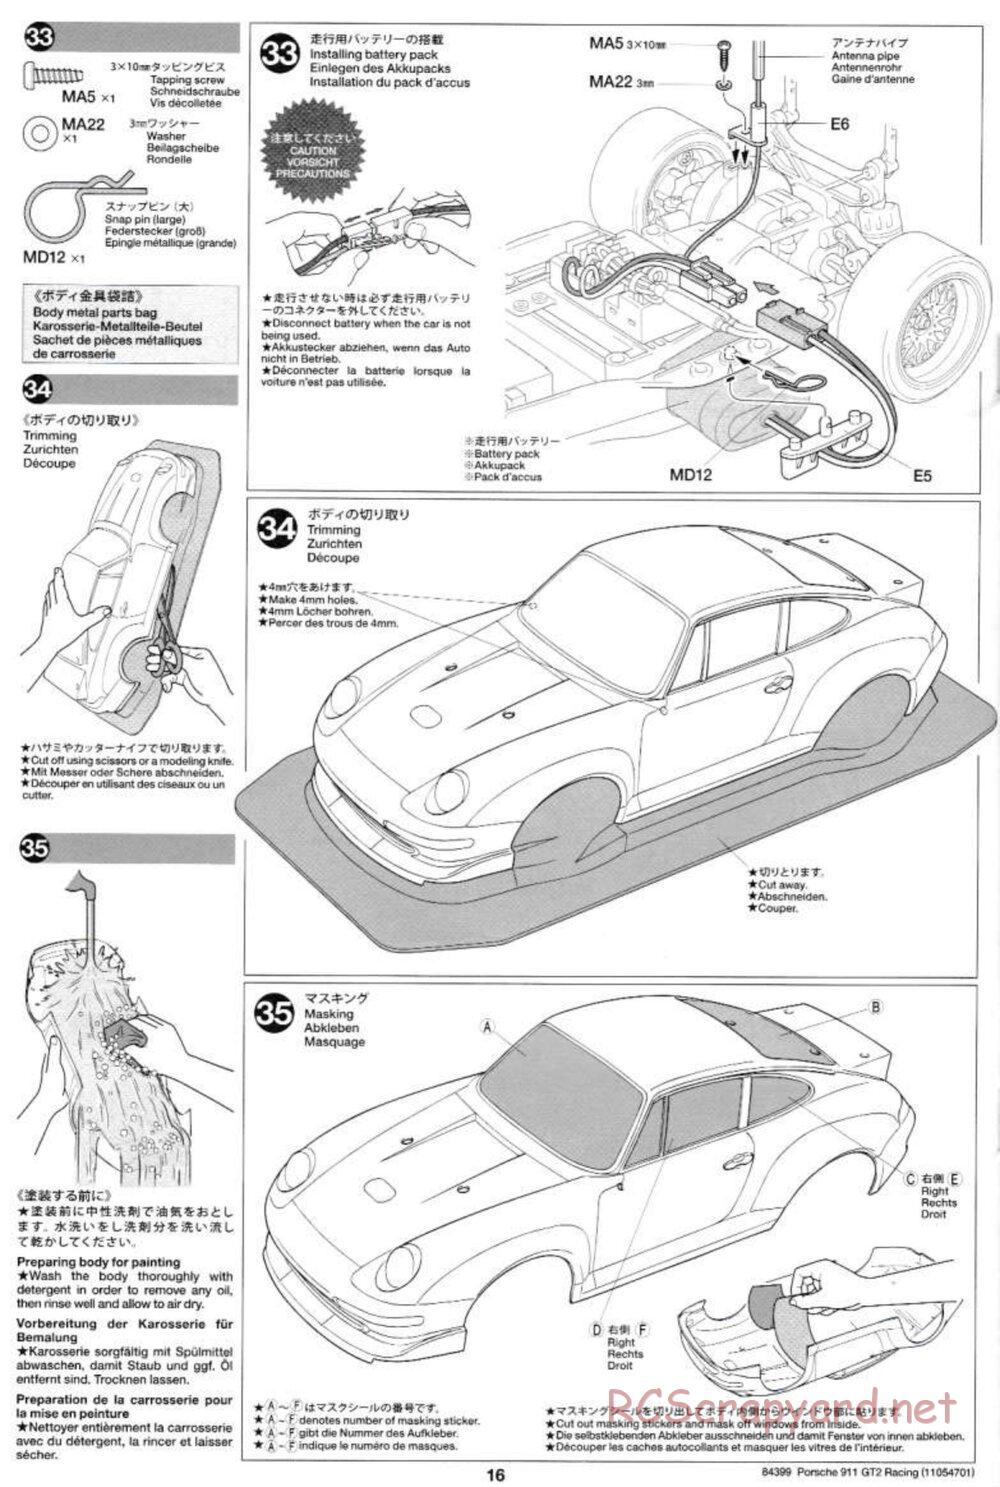 Tamiya - Porsche 911 GT2 Racing - TA-02SW Chassis - Manual - Page 16